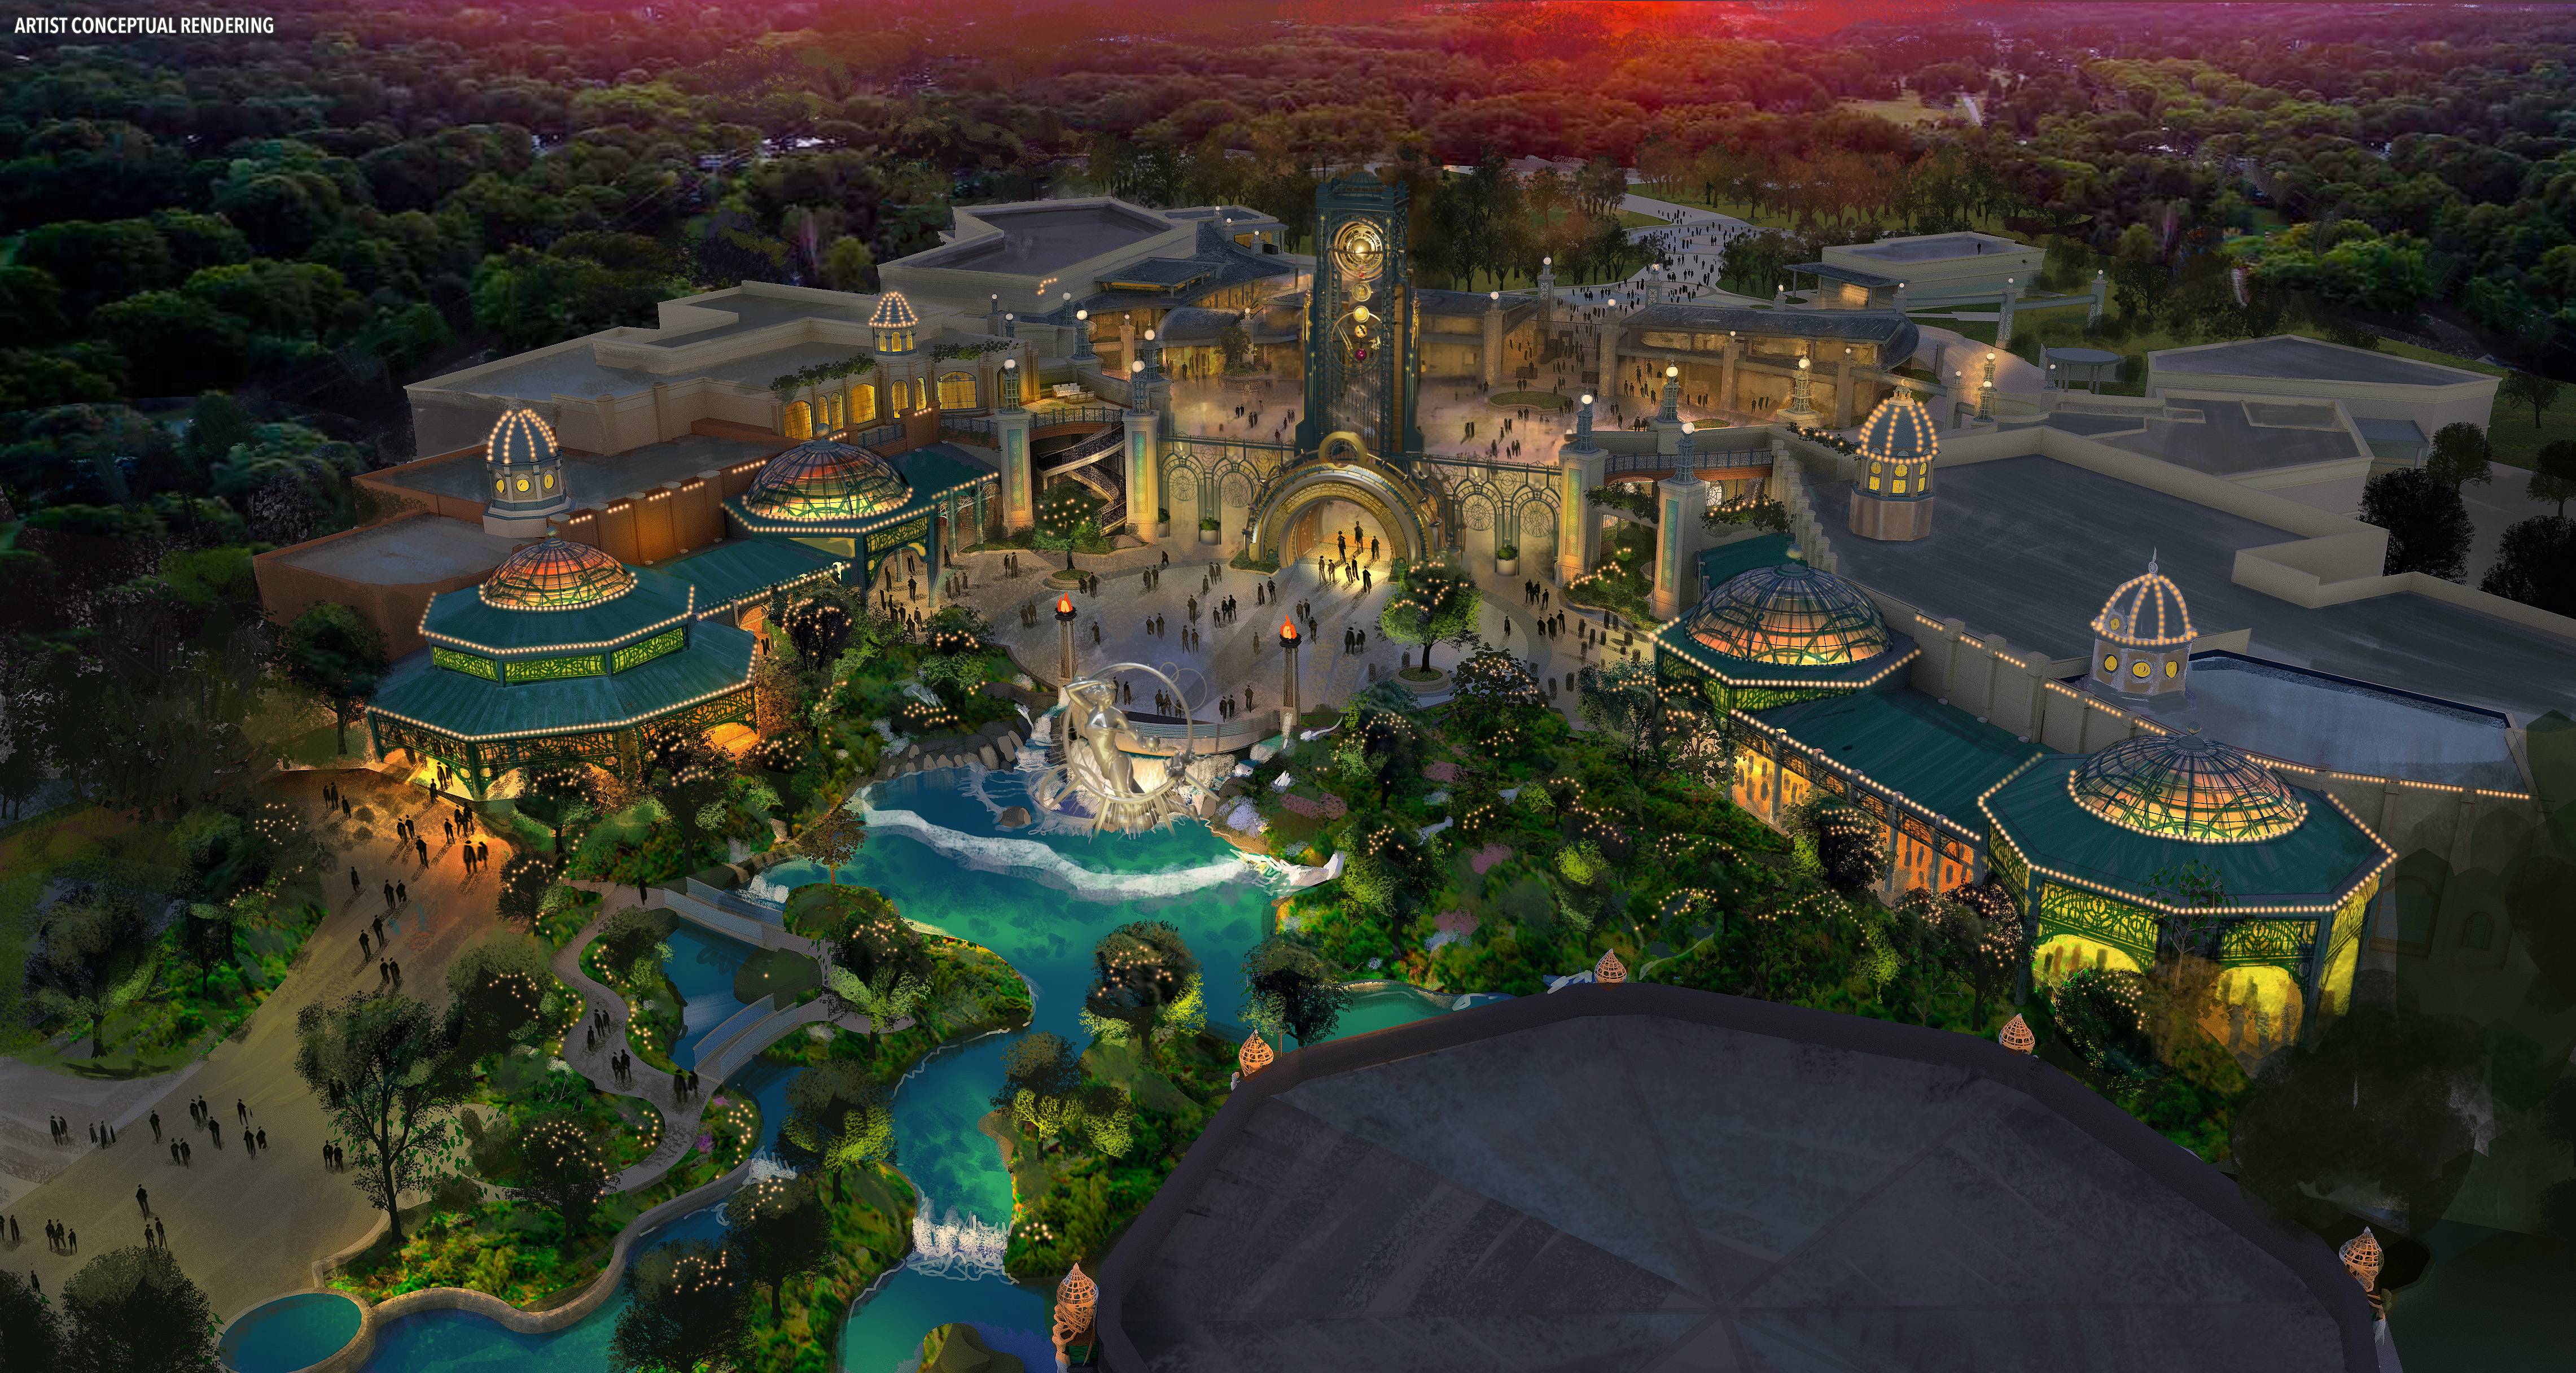 Disney's theme park business competitor Universal Orlando unveils first detailed look at Universal Epic Universe